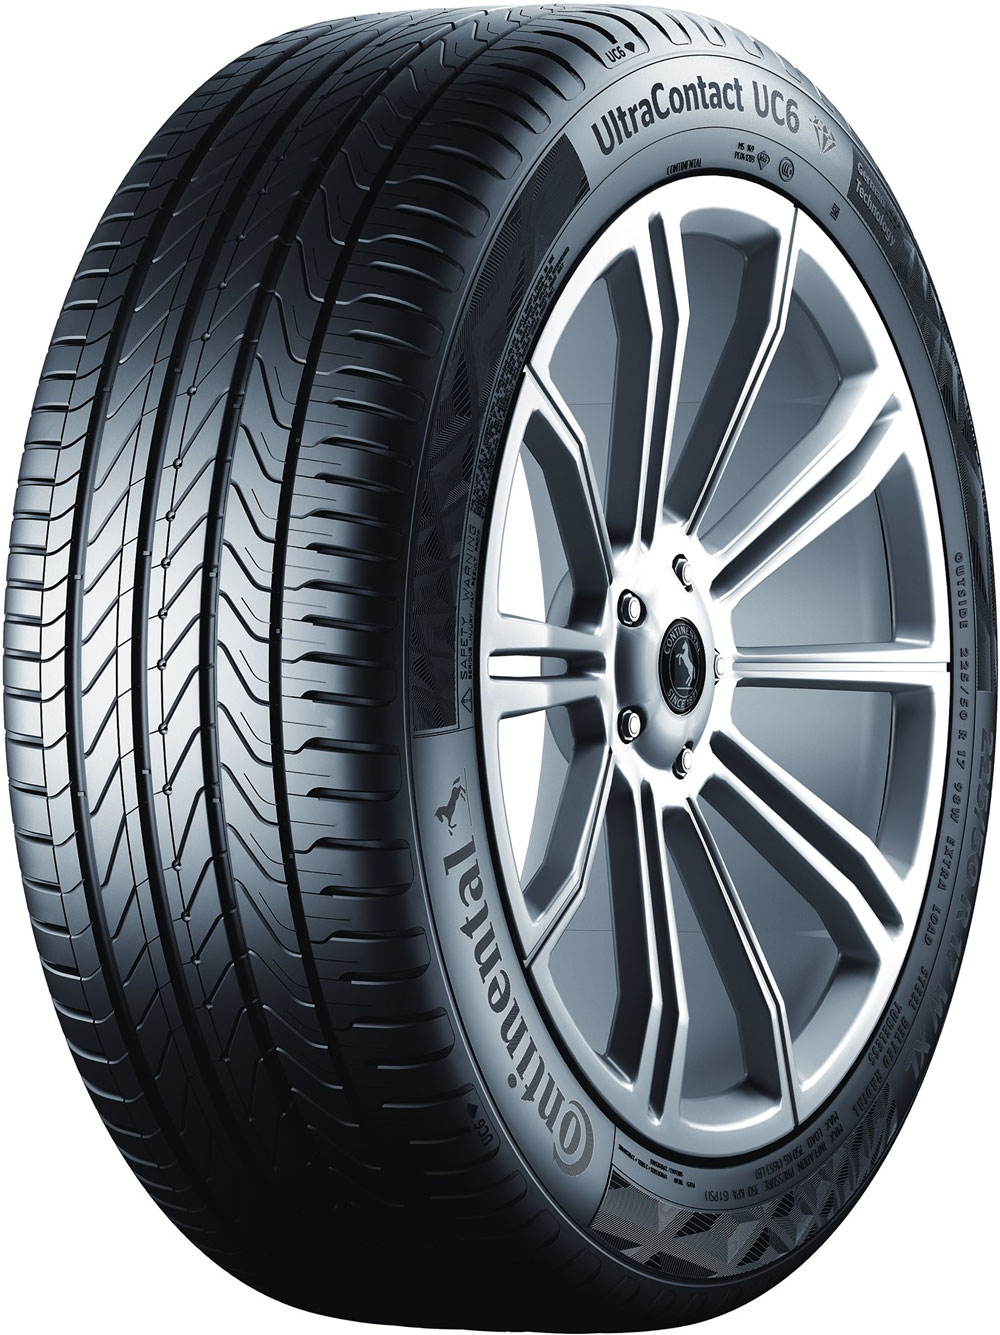 Anvelope auto CONTINENTAL UCXLFR XL 205/45 R17 88V